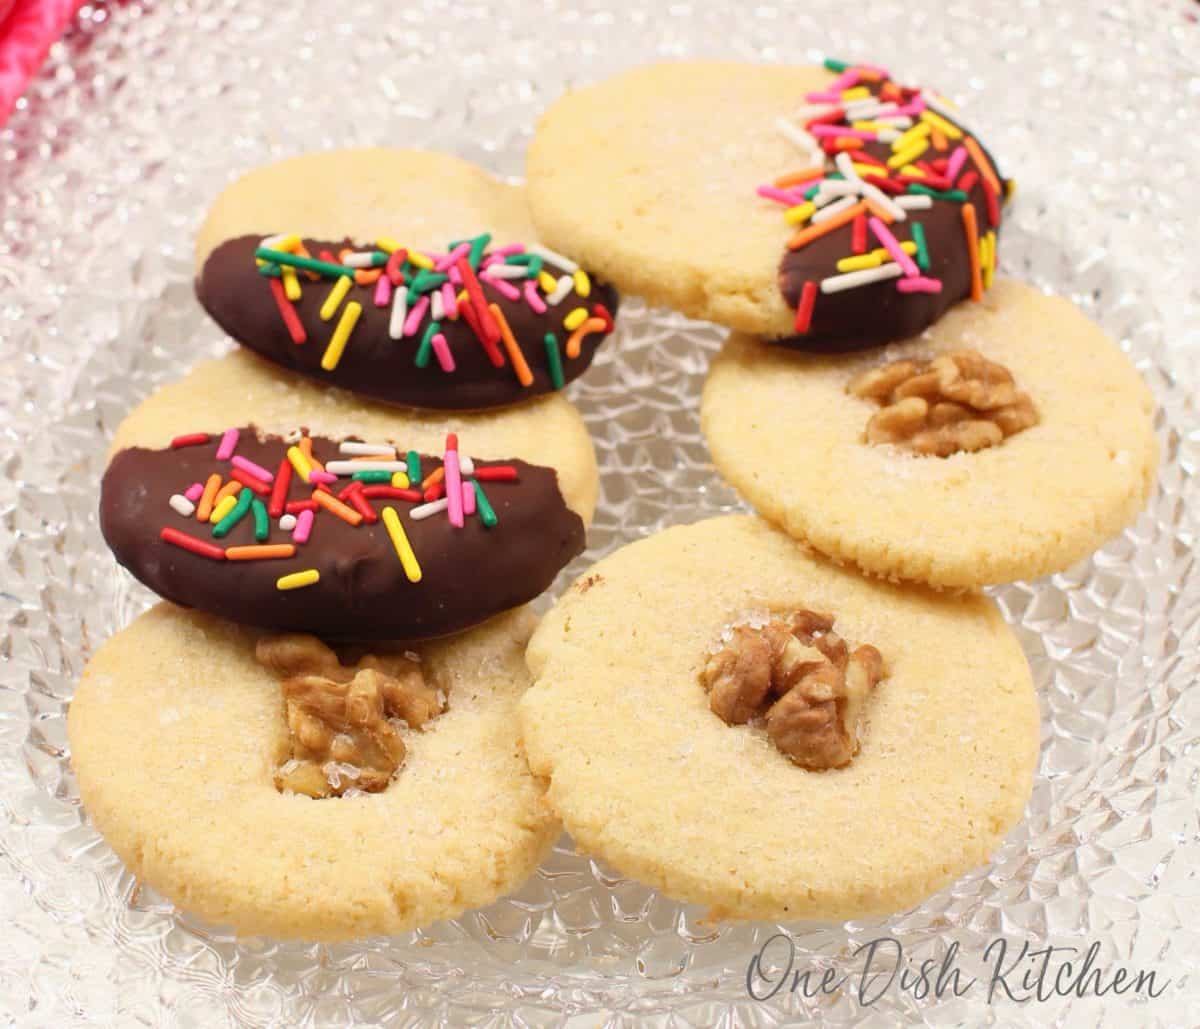 6 cookies on a clear plate; 3 cookies are dipped in chocolate and 3 have a nut in the center.